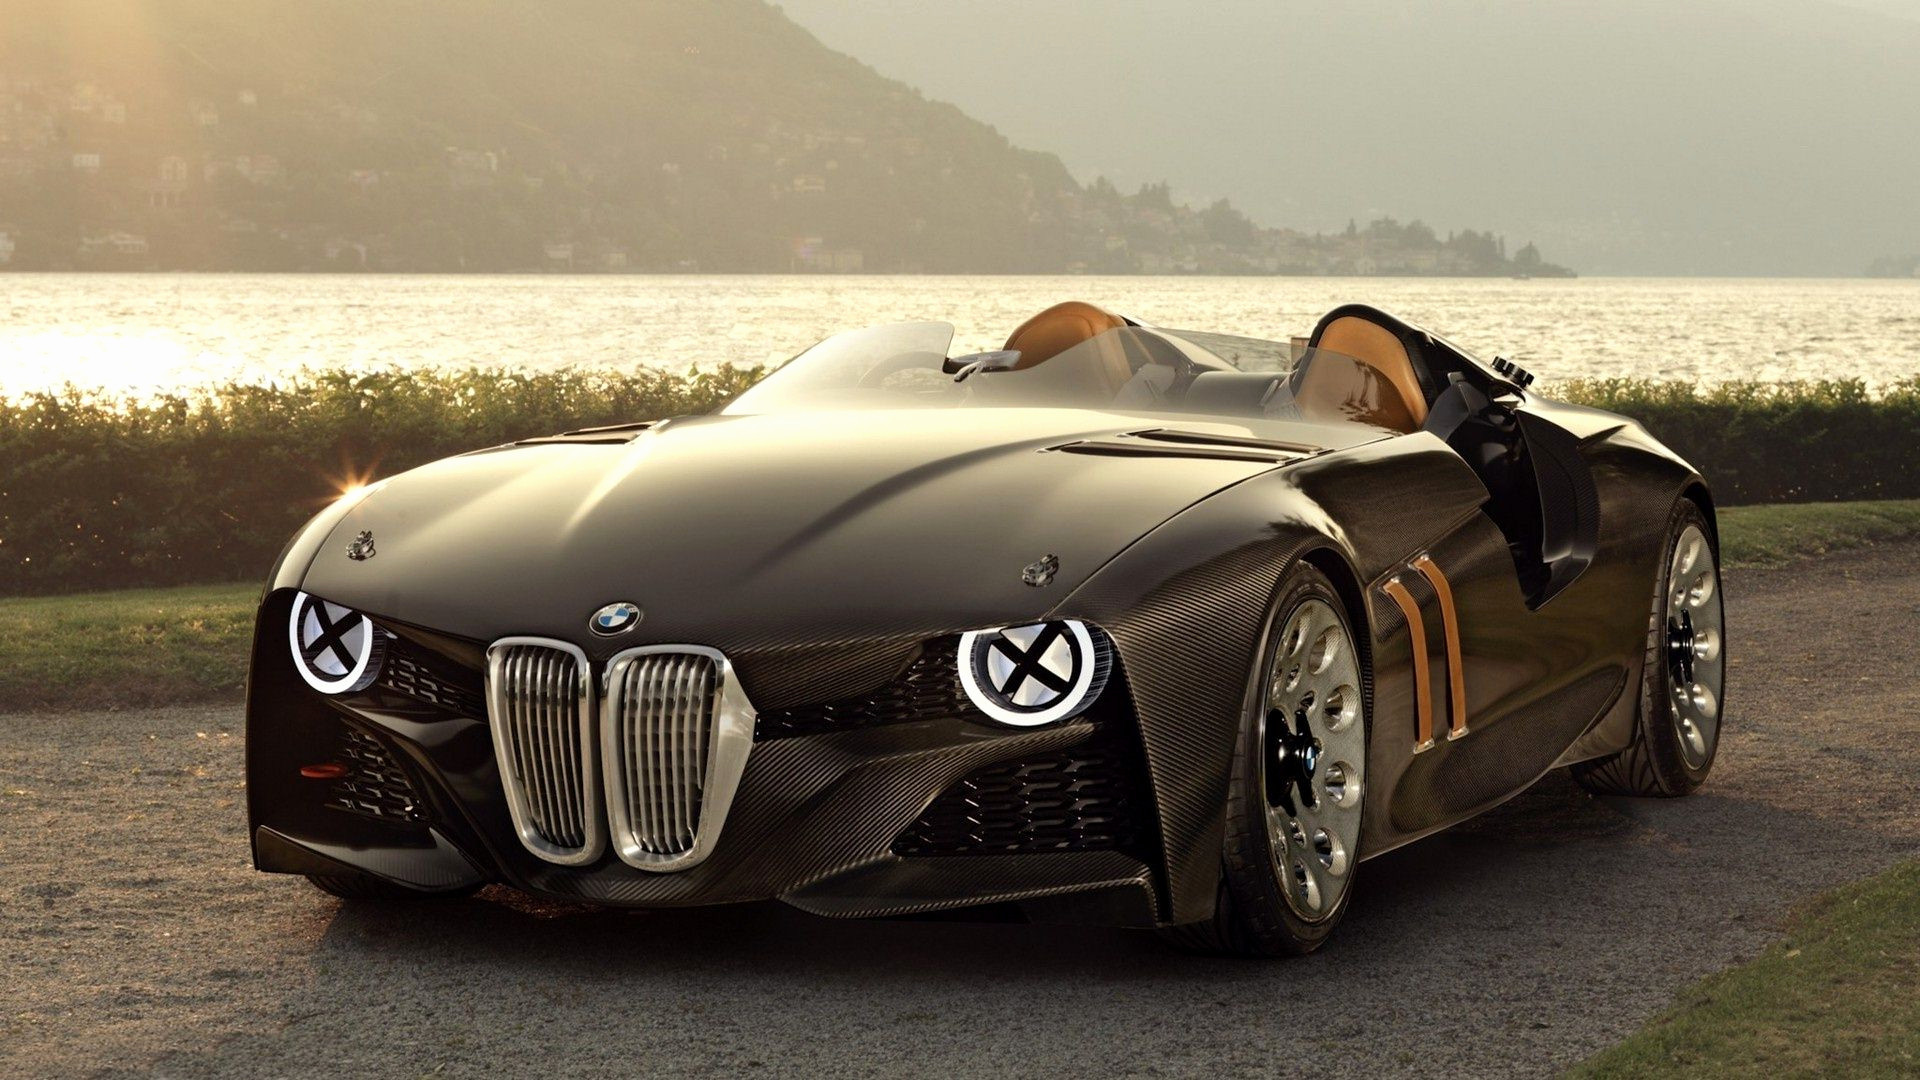 Bmw Car Images In Full Hd